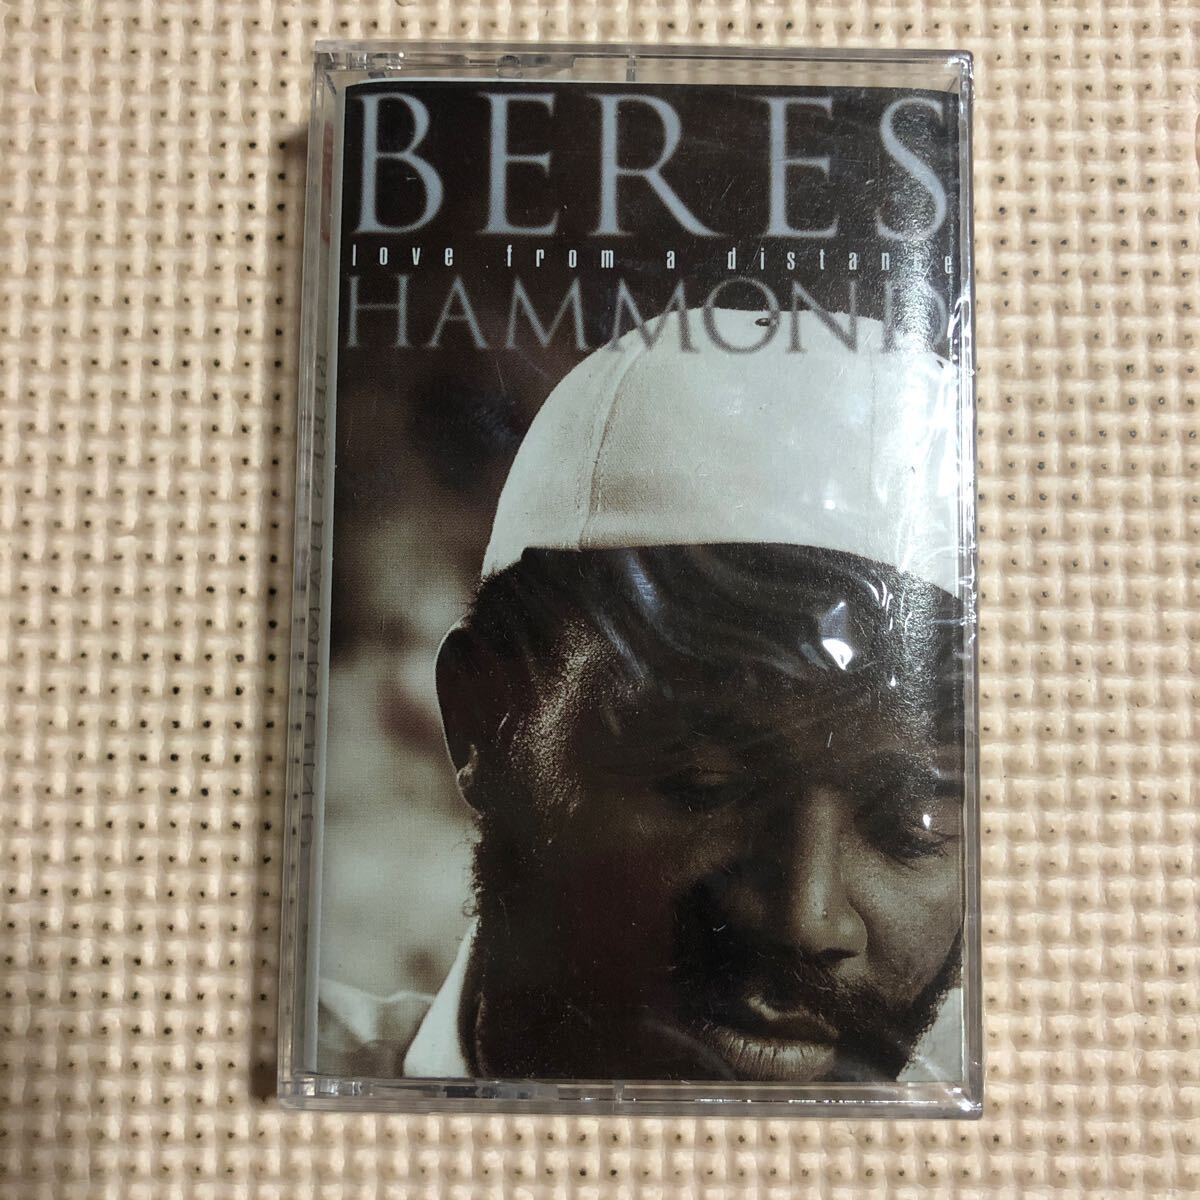 be less * Hammond Beres Hammond love from a distance foreign record cassette tape ^[ unopened new goods ]